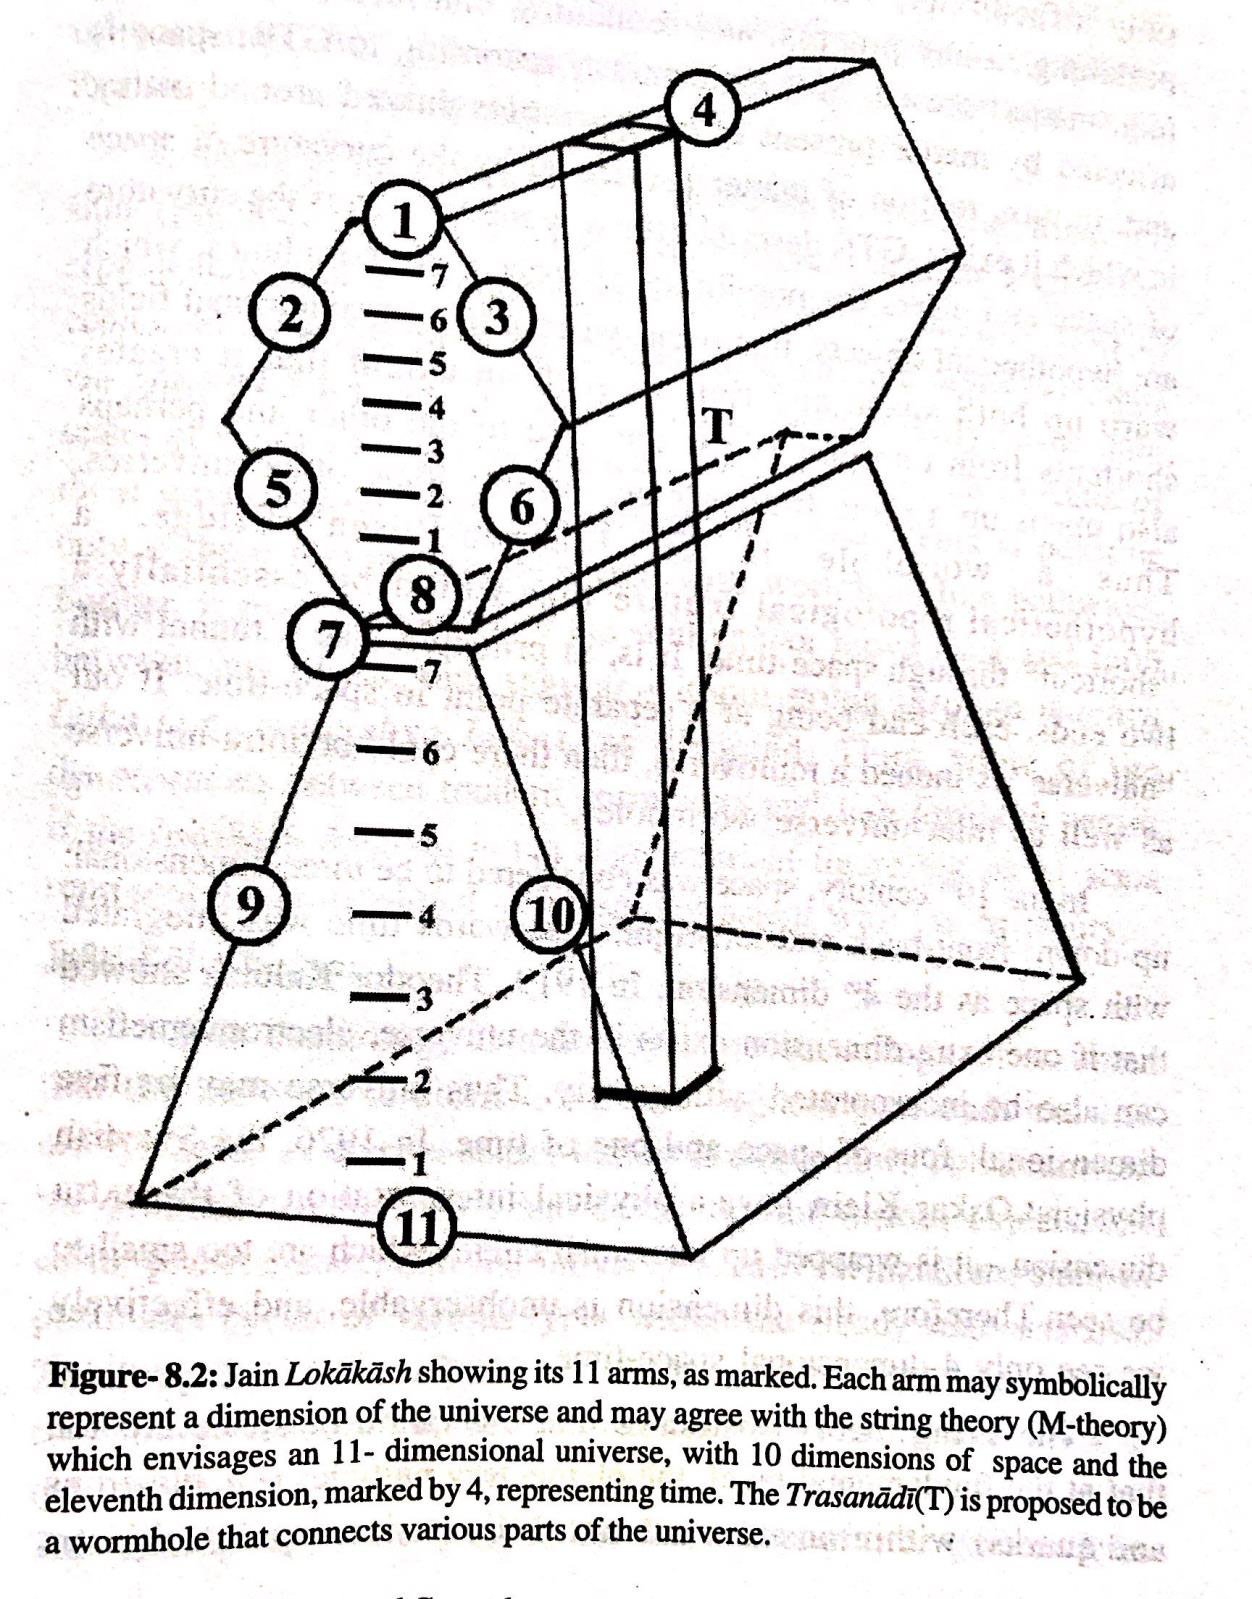 Structure of the Universe in Jainism